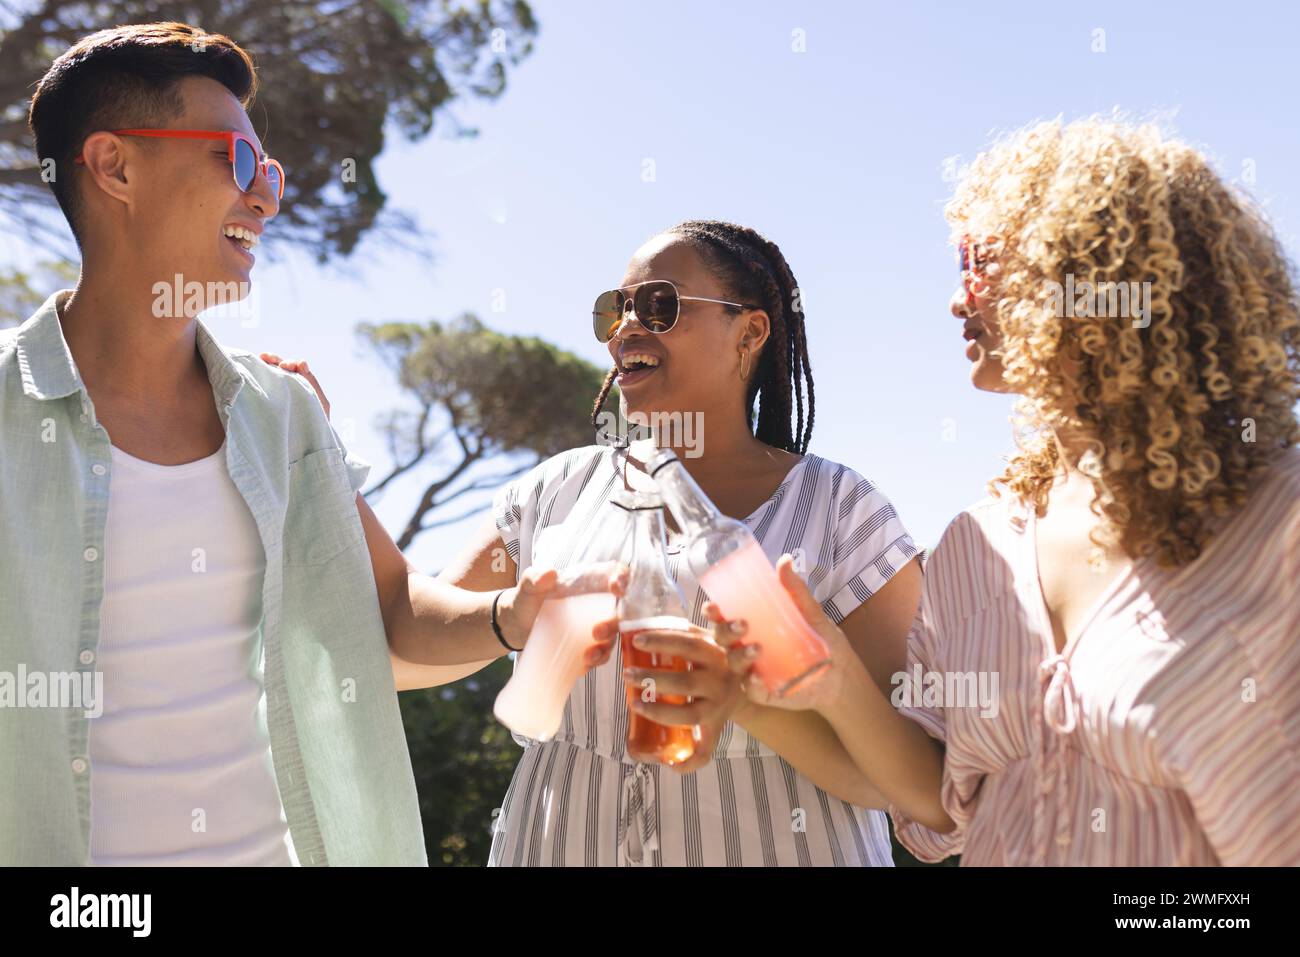 Young Asian man and diverse women enjoy a sunny outdoor gathering Stock Photo